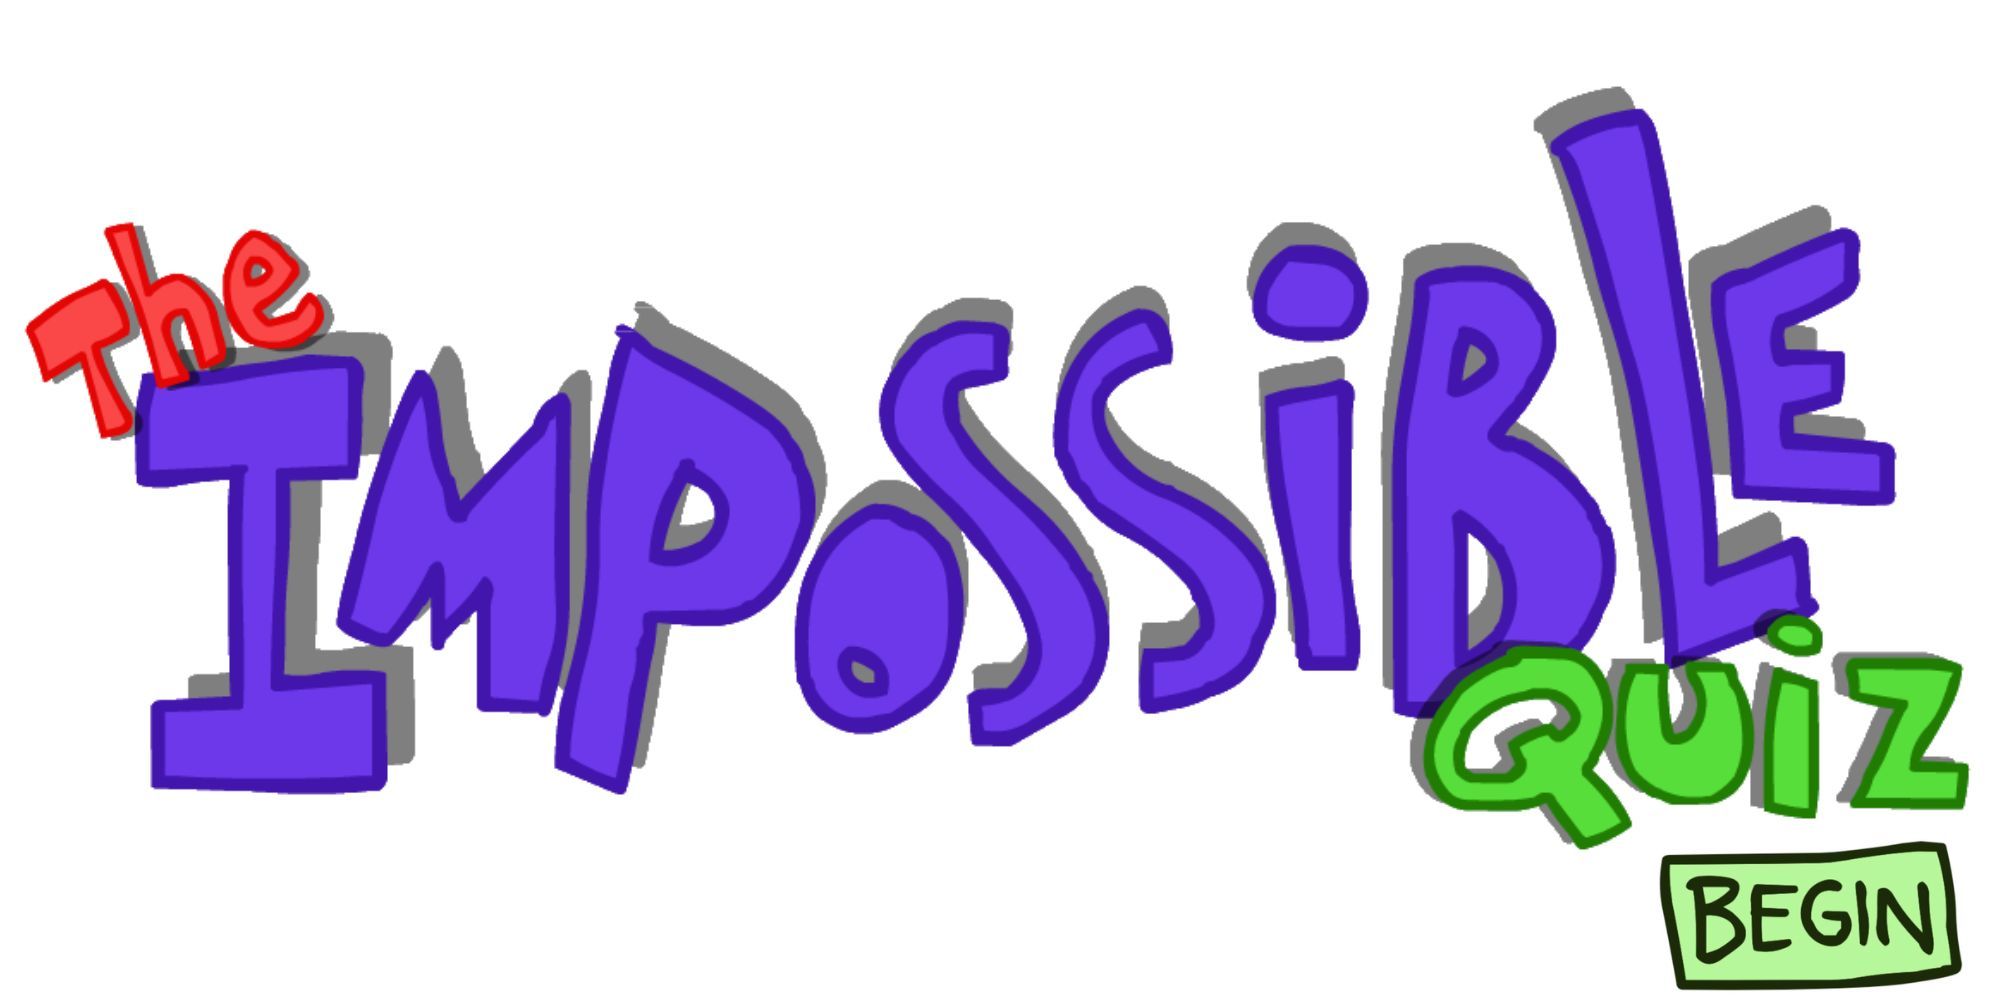 The Impossible Quiz title and begin button